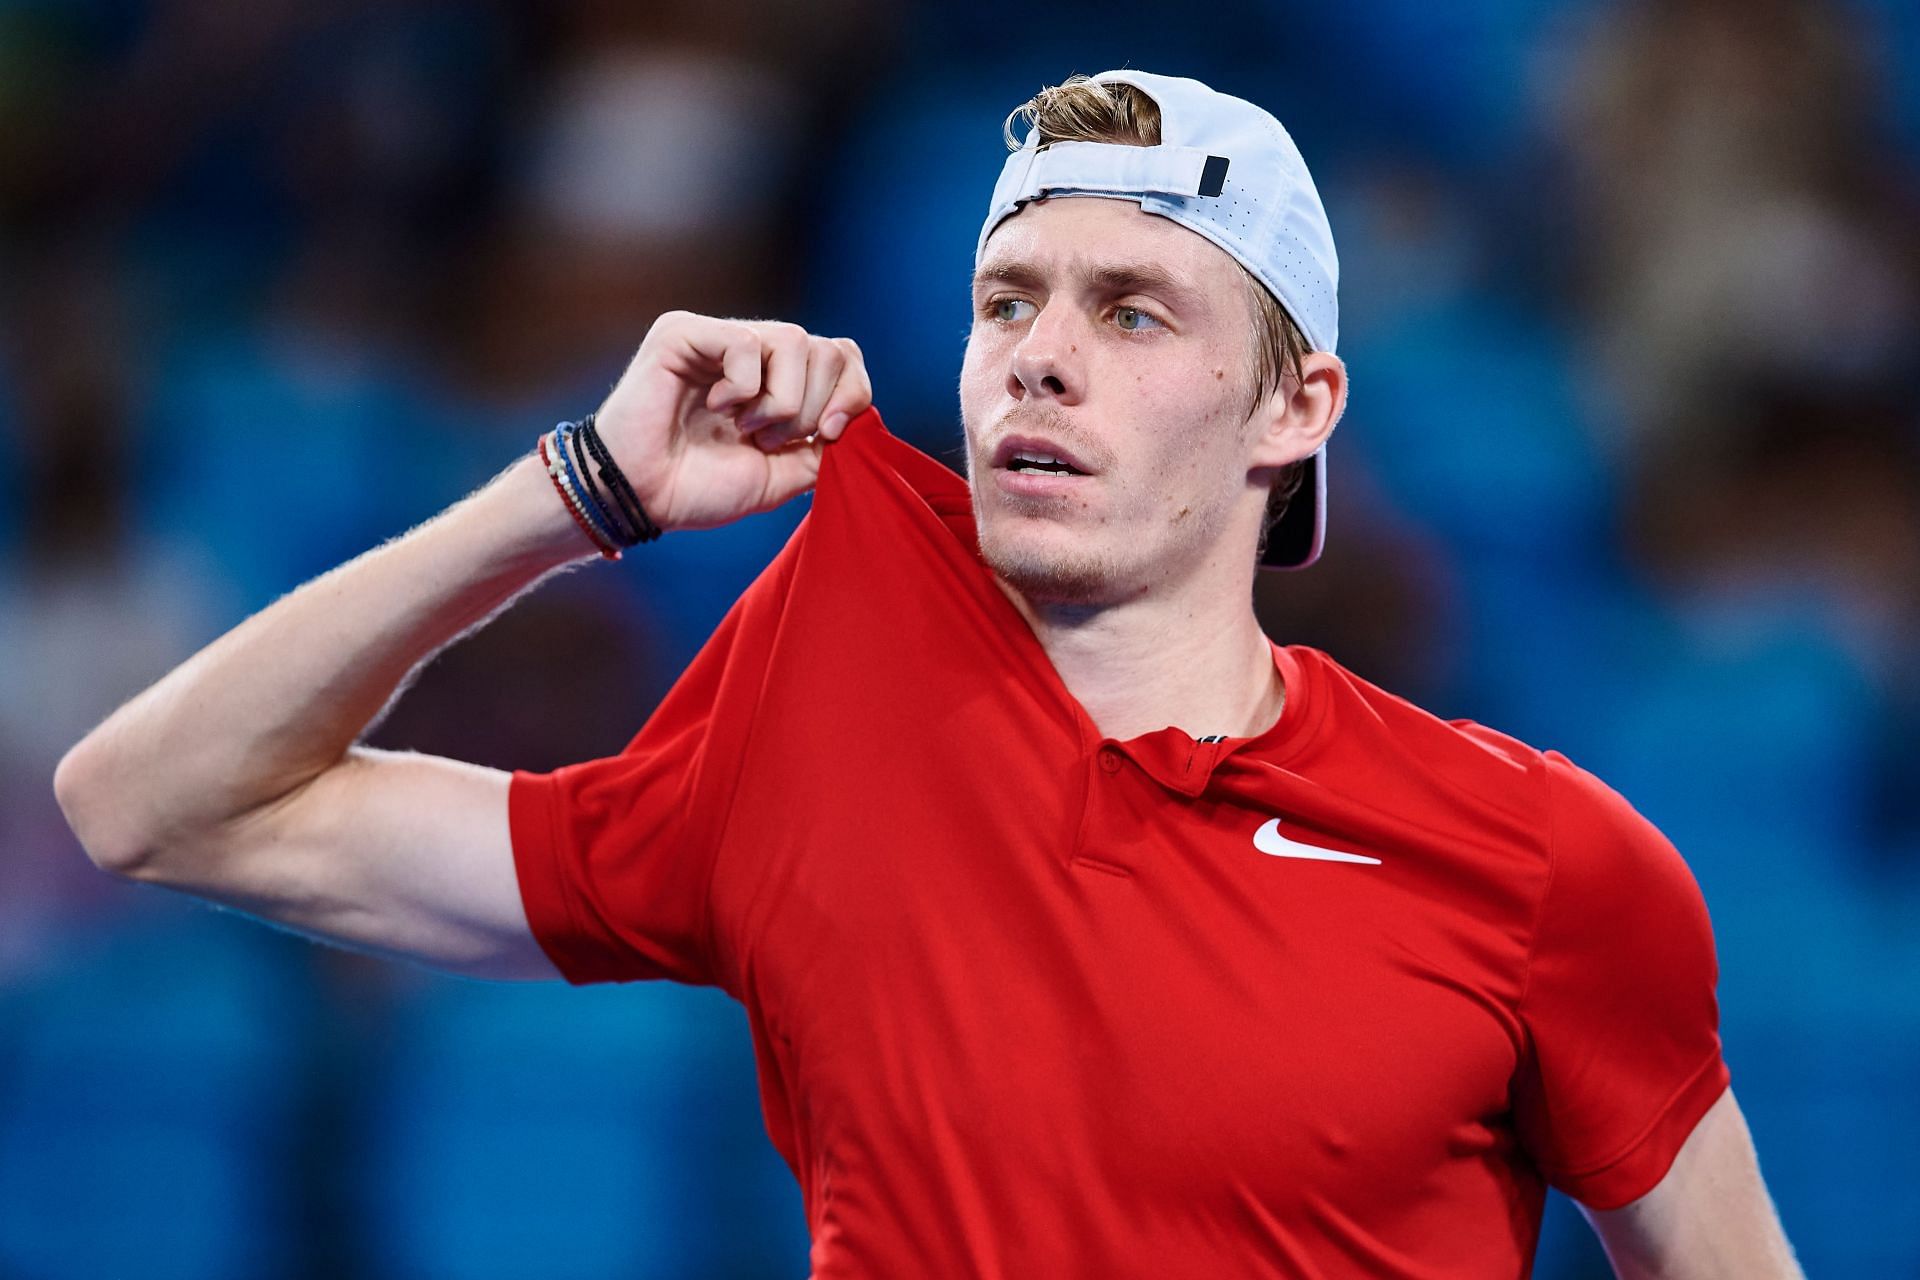 Denis Shapovalov begins his campaign against Laslo Djere on Day 1 of the Australian Open